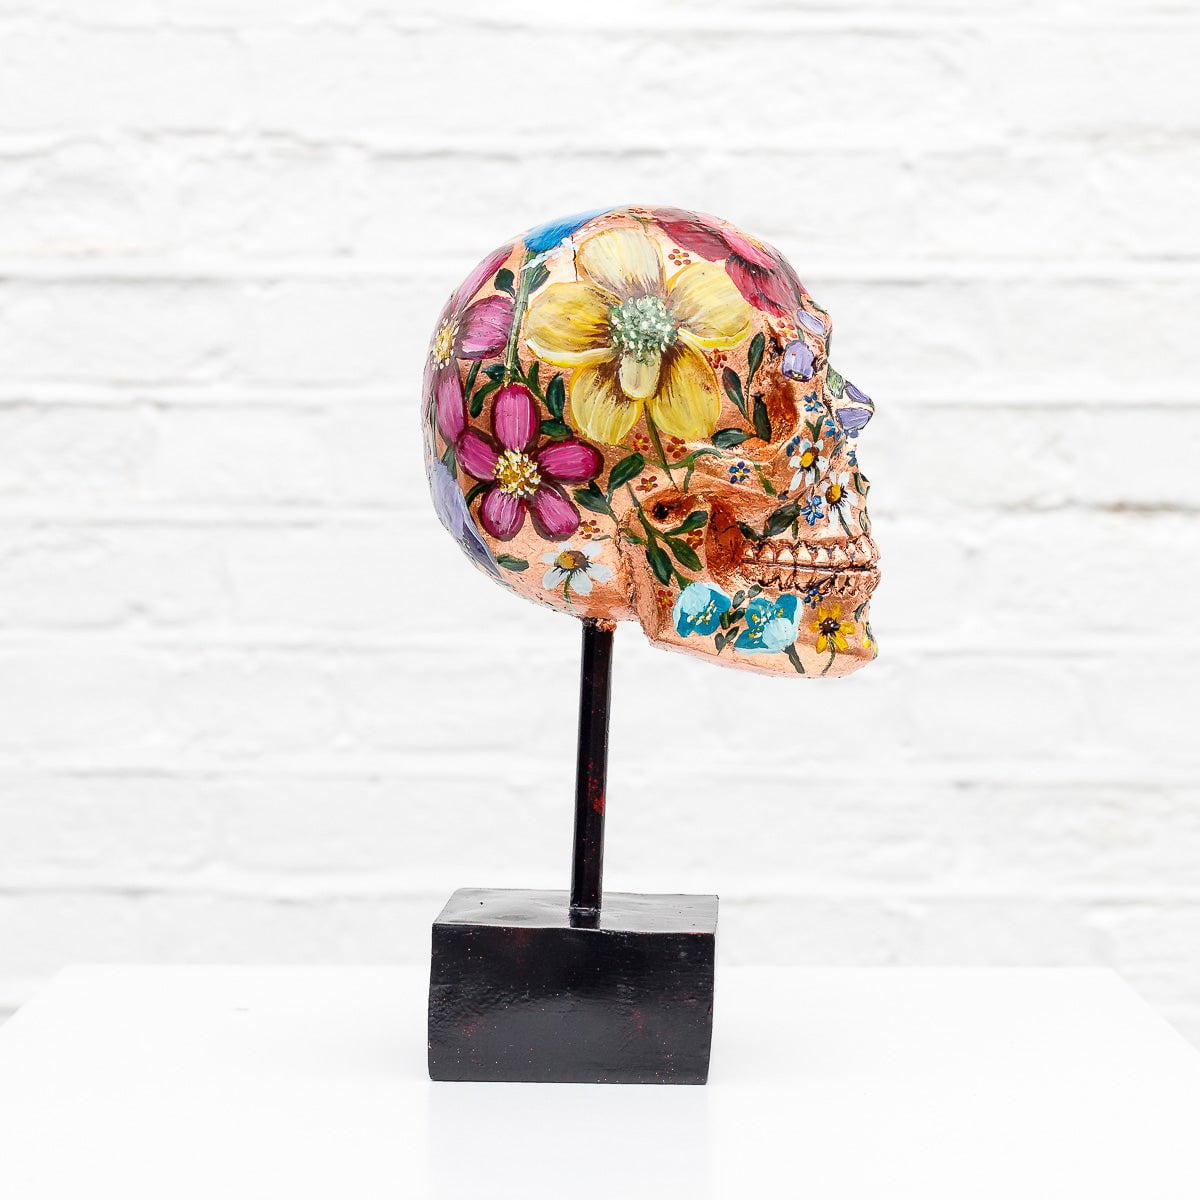 In My Mind - Original Sculpture Becky Smith Loose